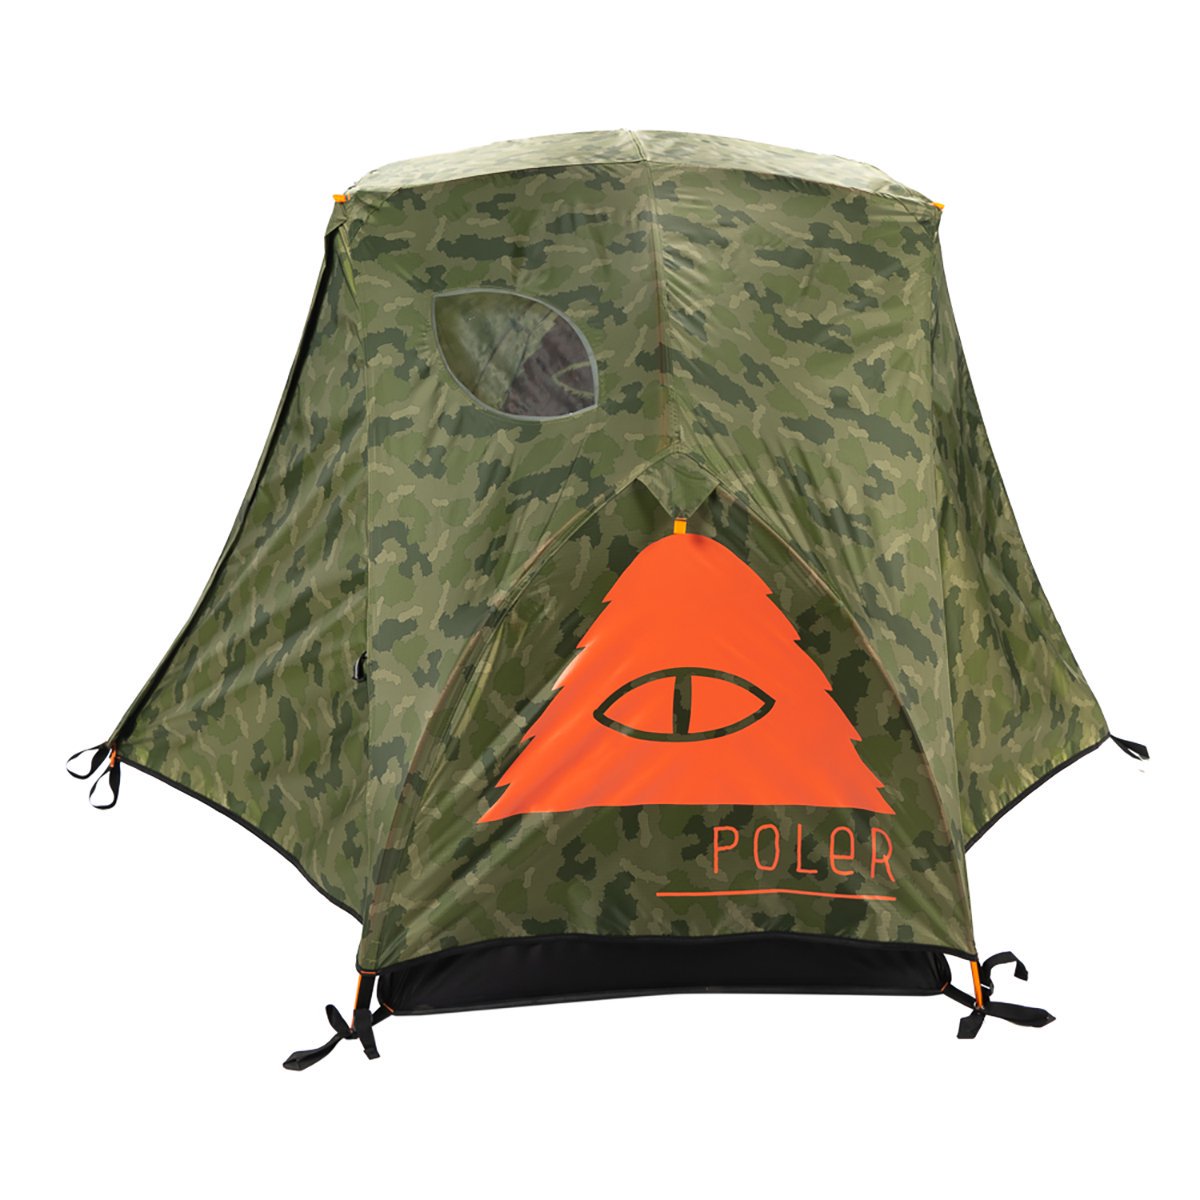 ONE PERSON TENT